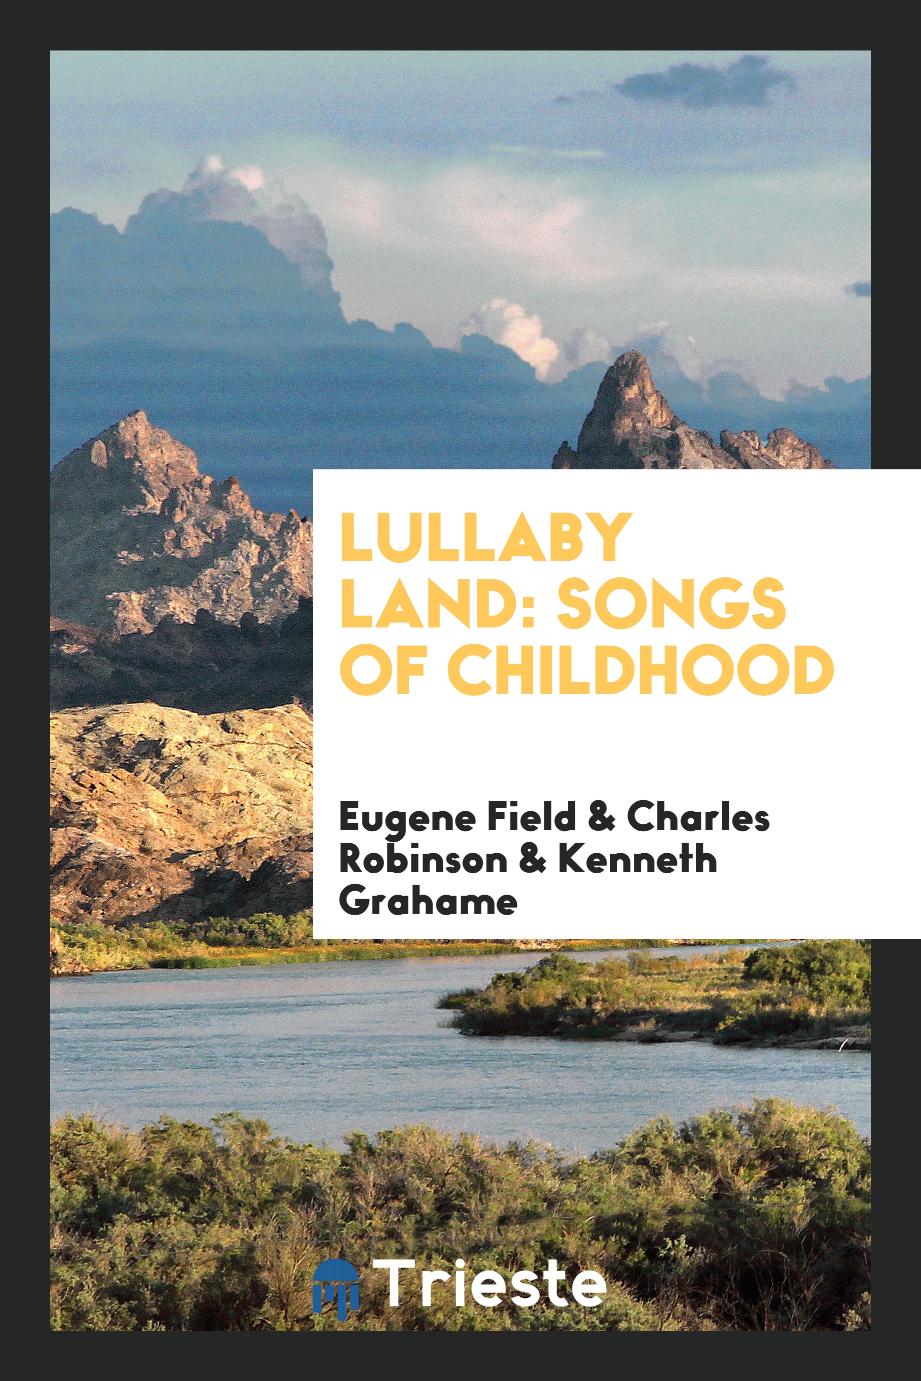 Lullaby Land: Songs of Childhood